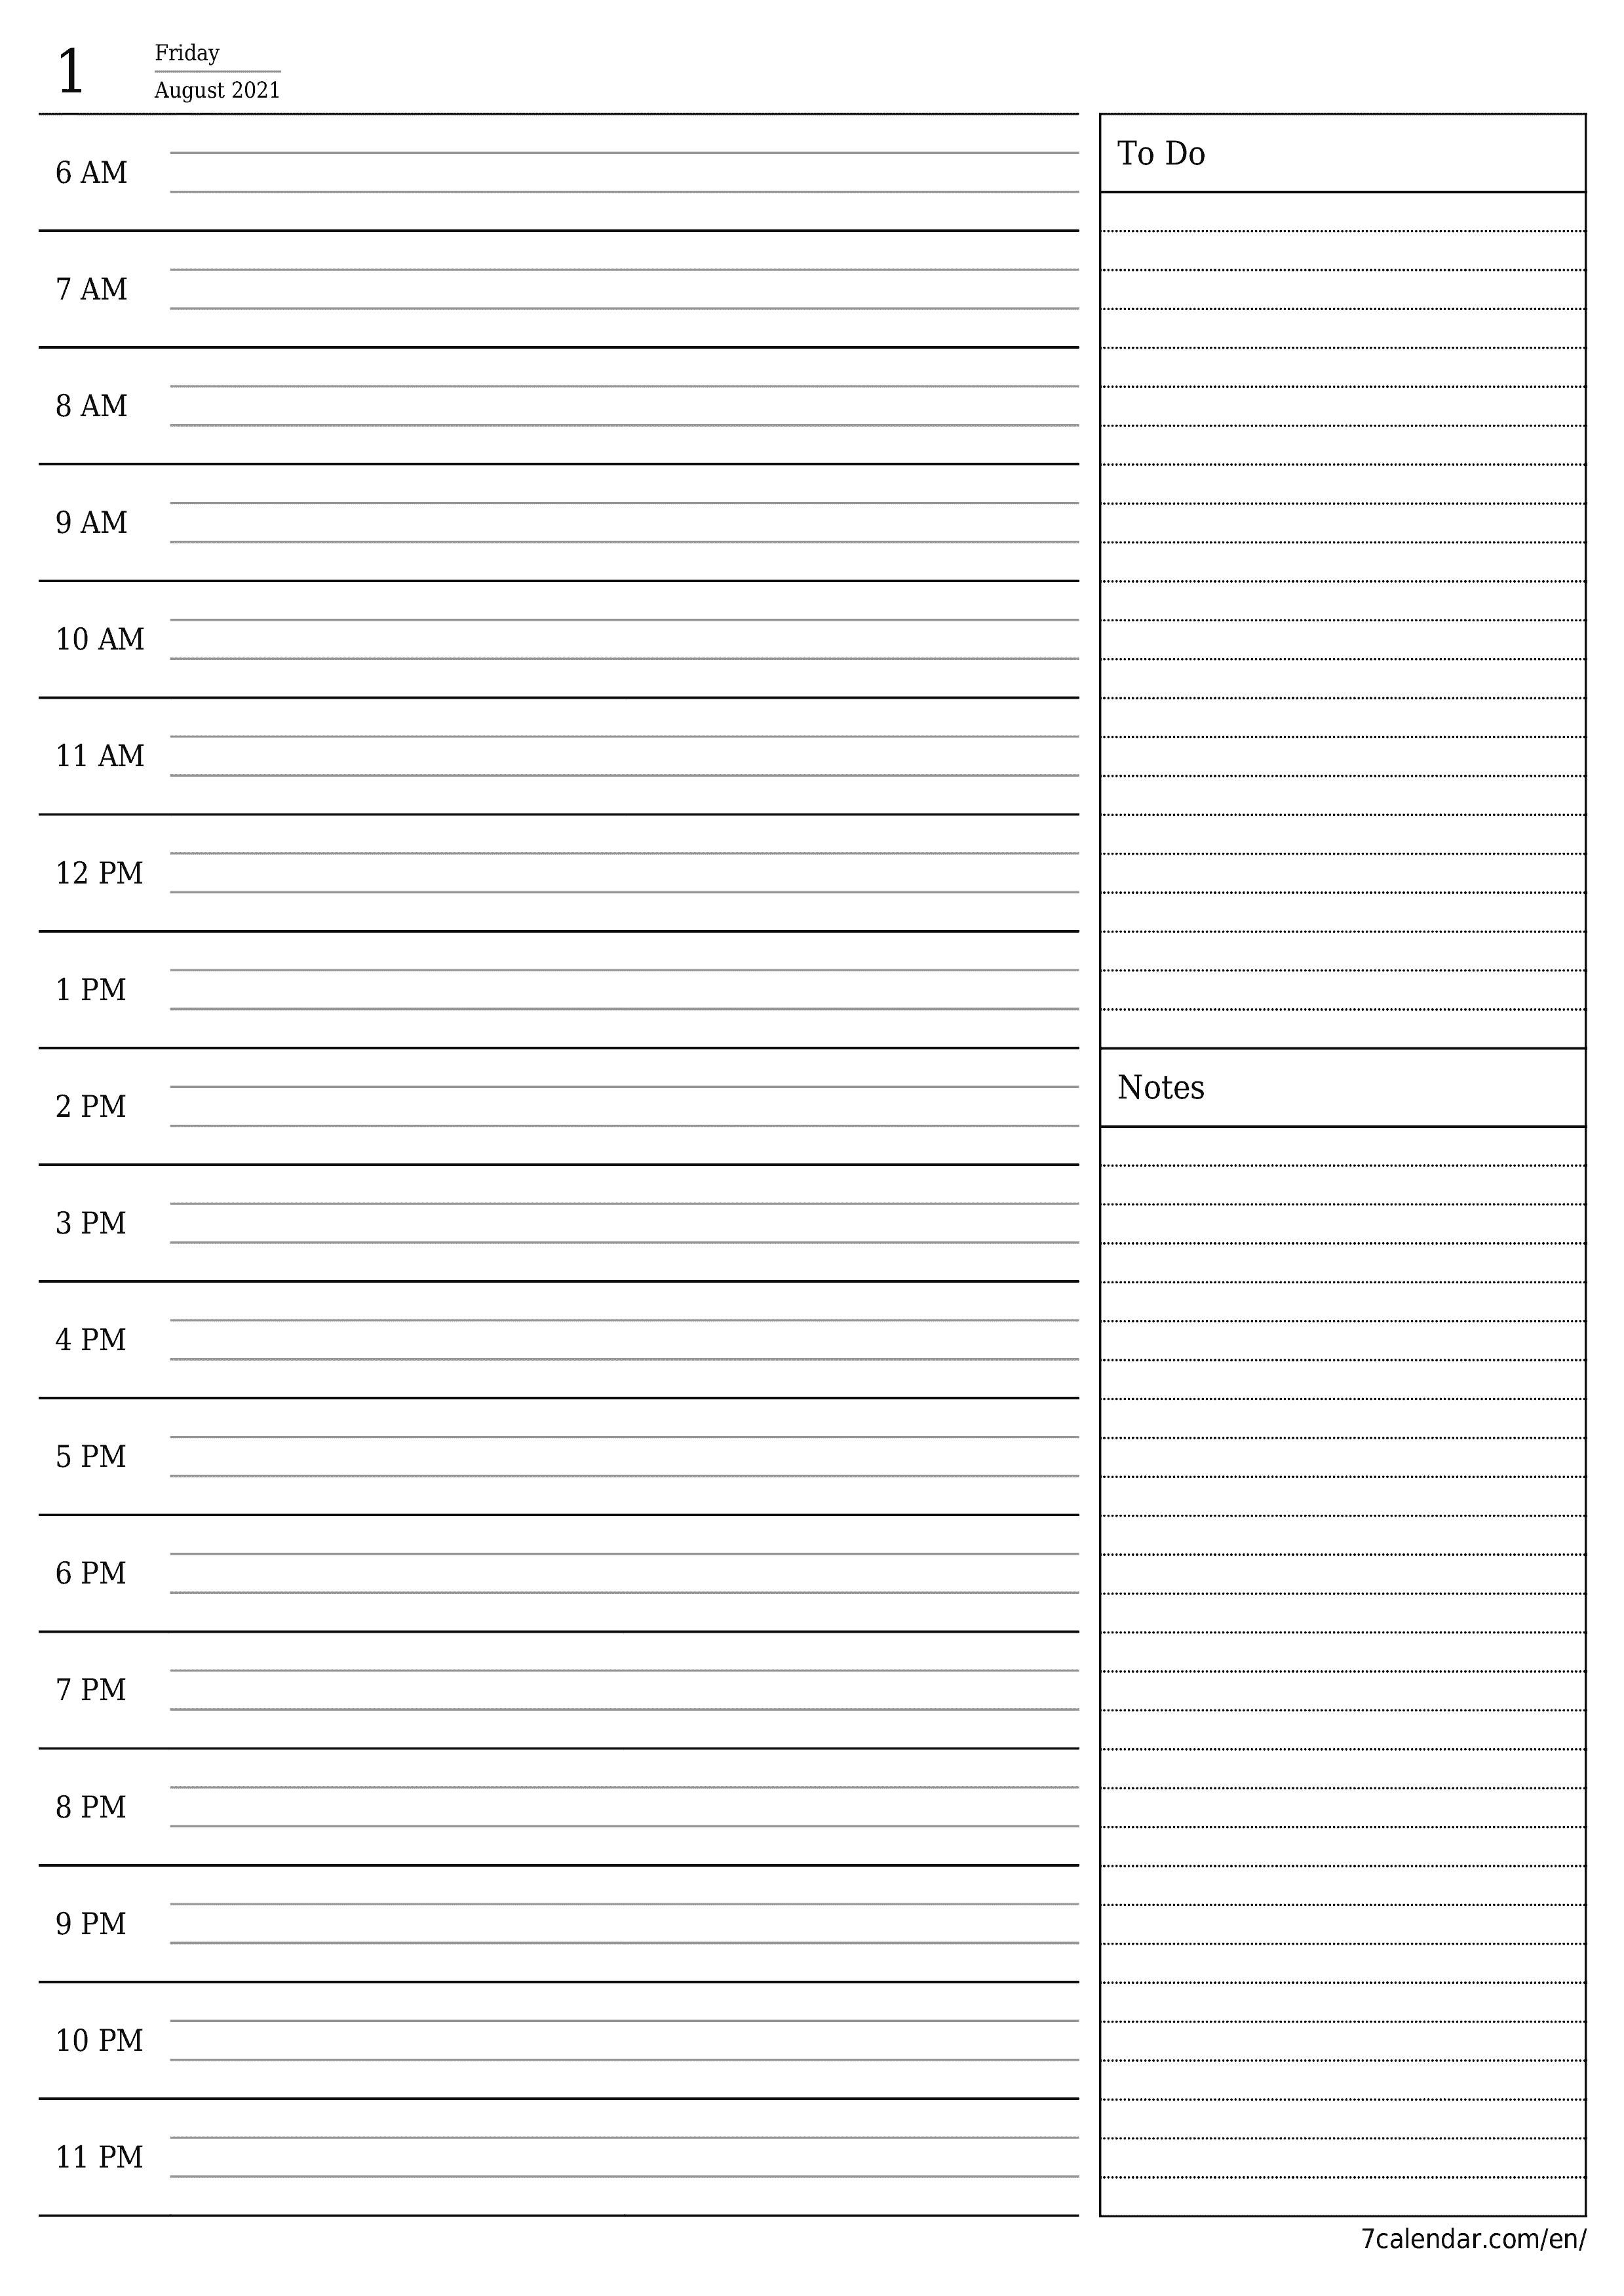 Blank daily calendar planner for day August 2021 with notes, save and print to PDF PNG English - 7calendar.com